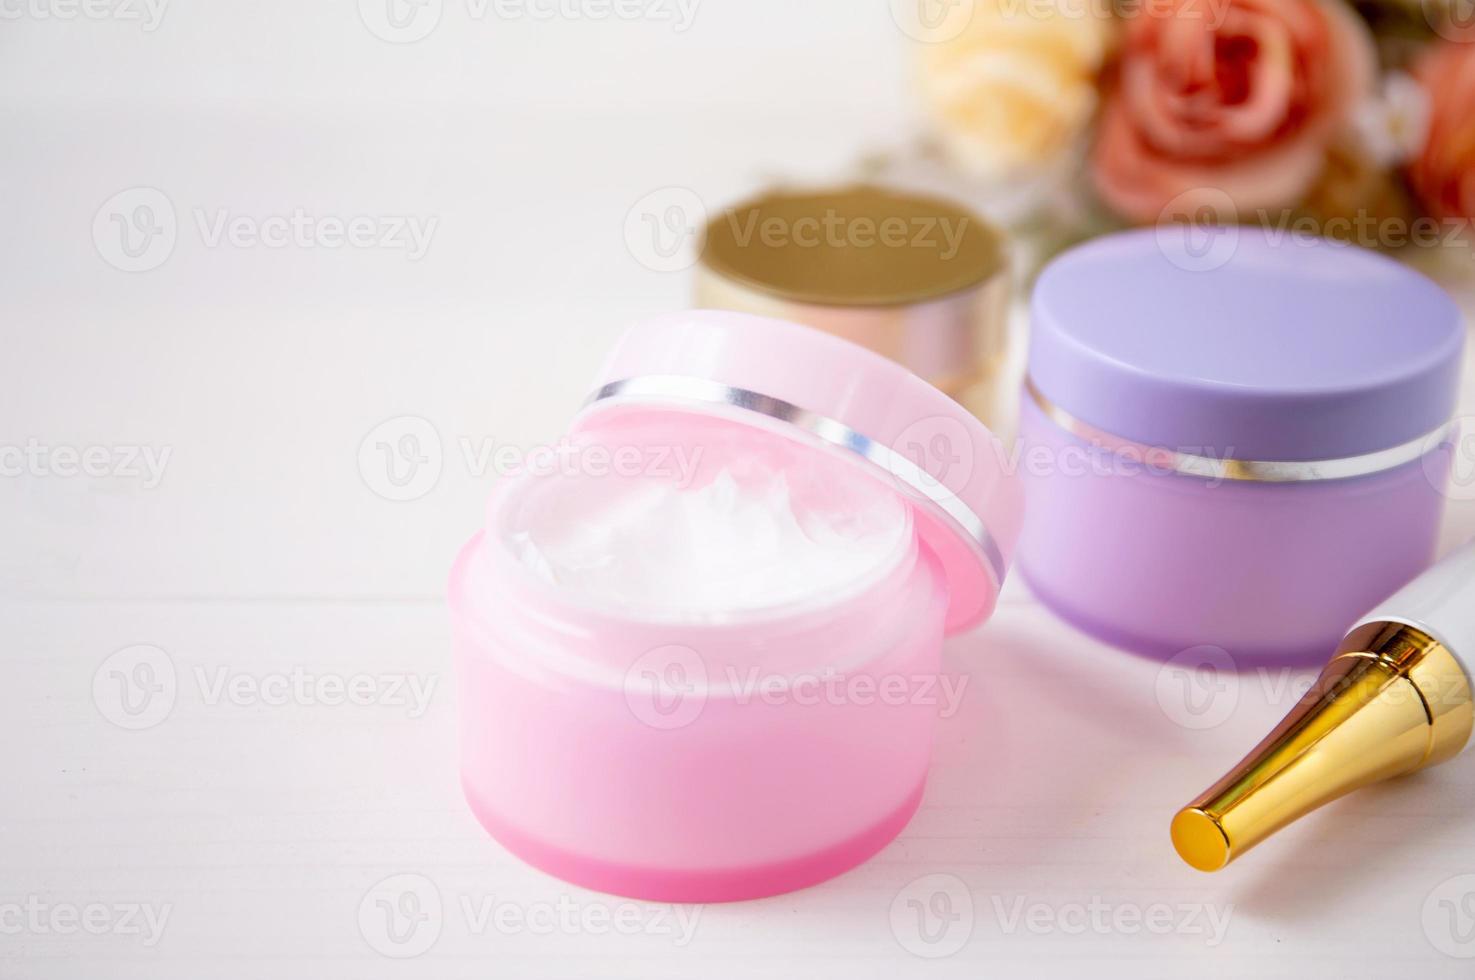 cosmetic and skin care product and flower on white wood table, beauty with treatment cream and moisturizing on wooden desk, health and wellness concept. photo